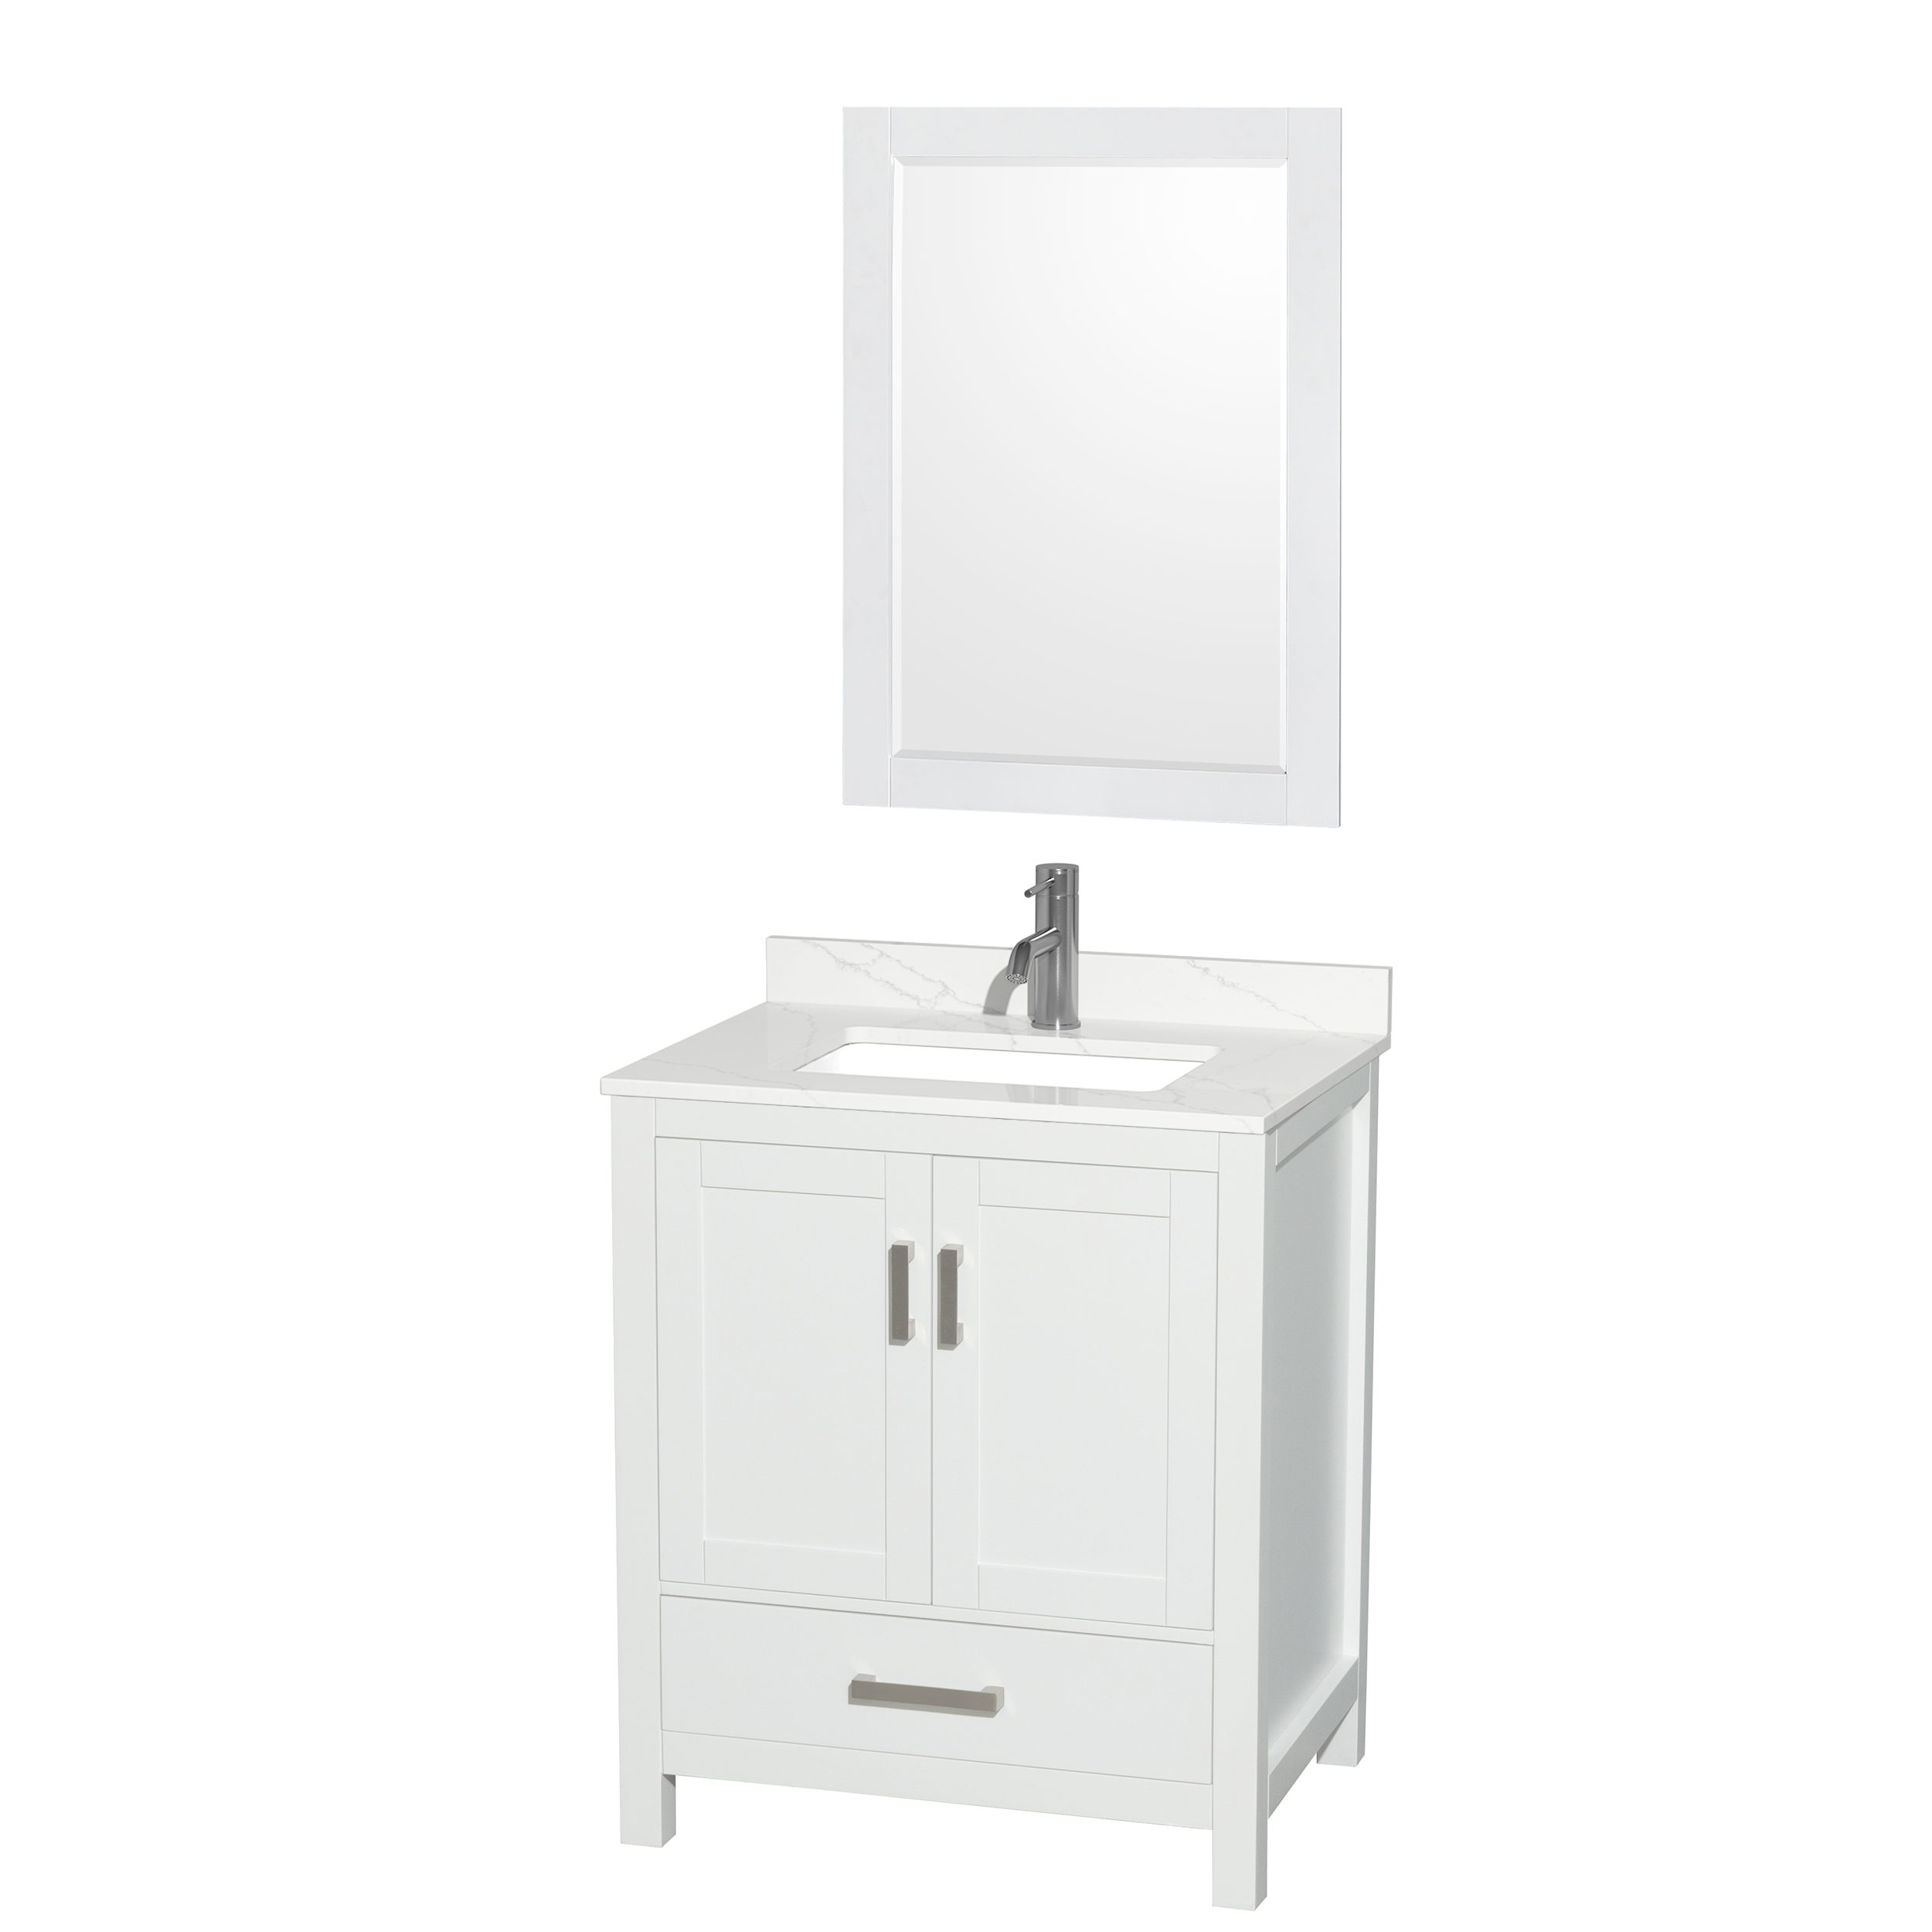 sheffield 30" single bathroom vanity by wyndham collection - white